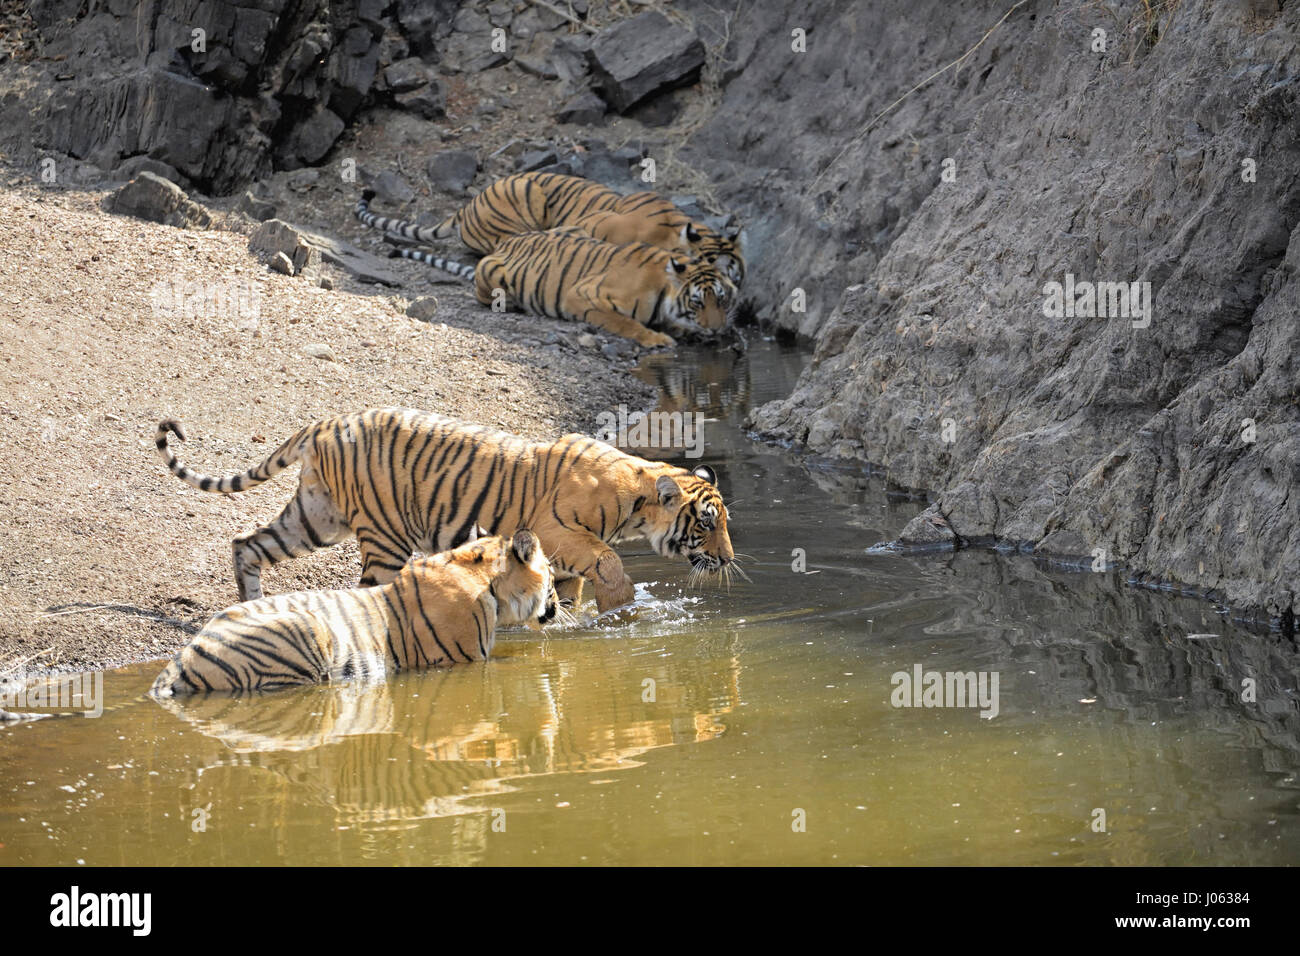 A family of four Bengal tigers, cooling off and drinking from a water hole in Ranthambore tiger reserve, India, during the hot and dry summers. Stock Photo